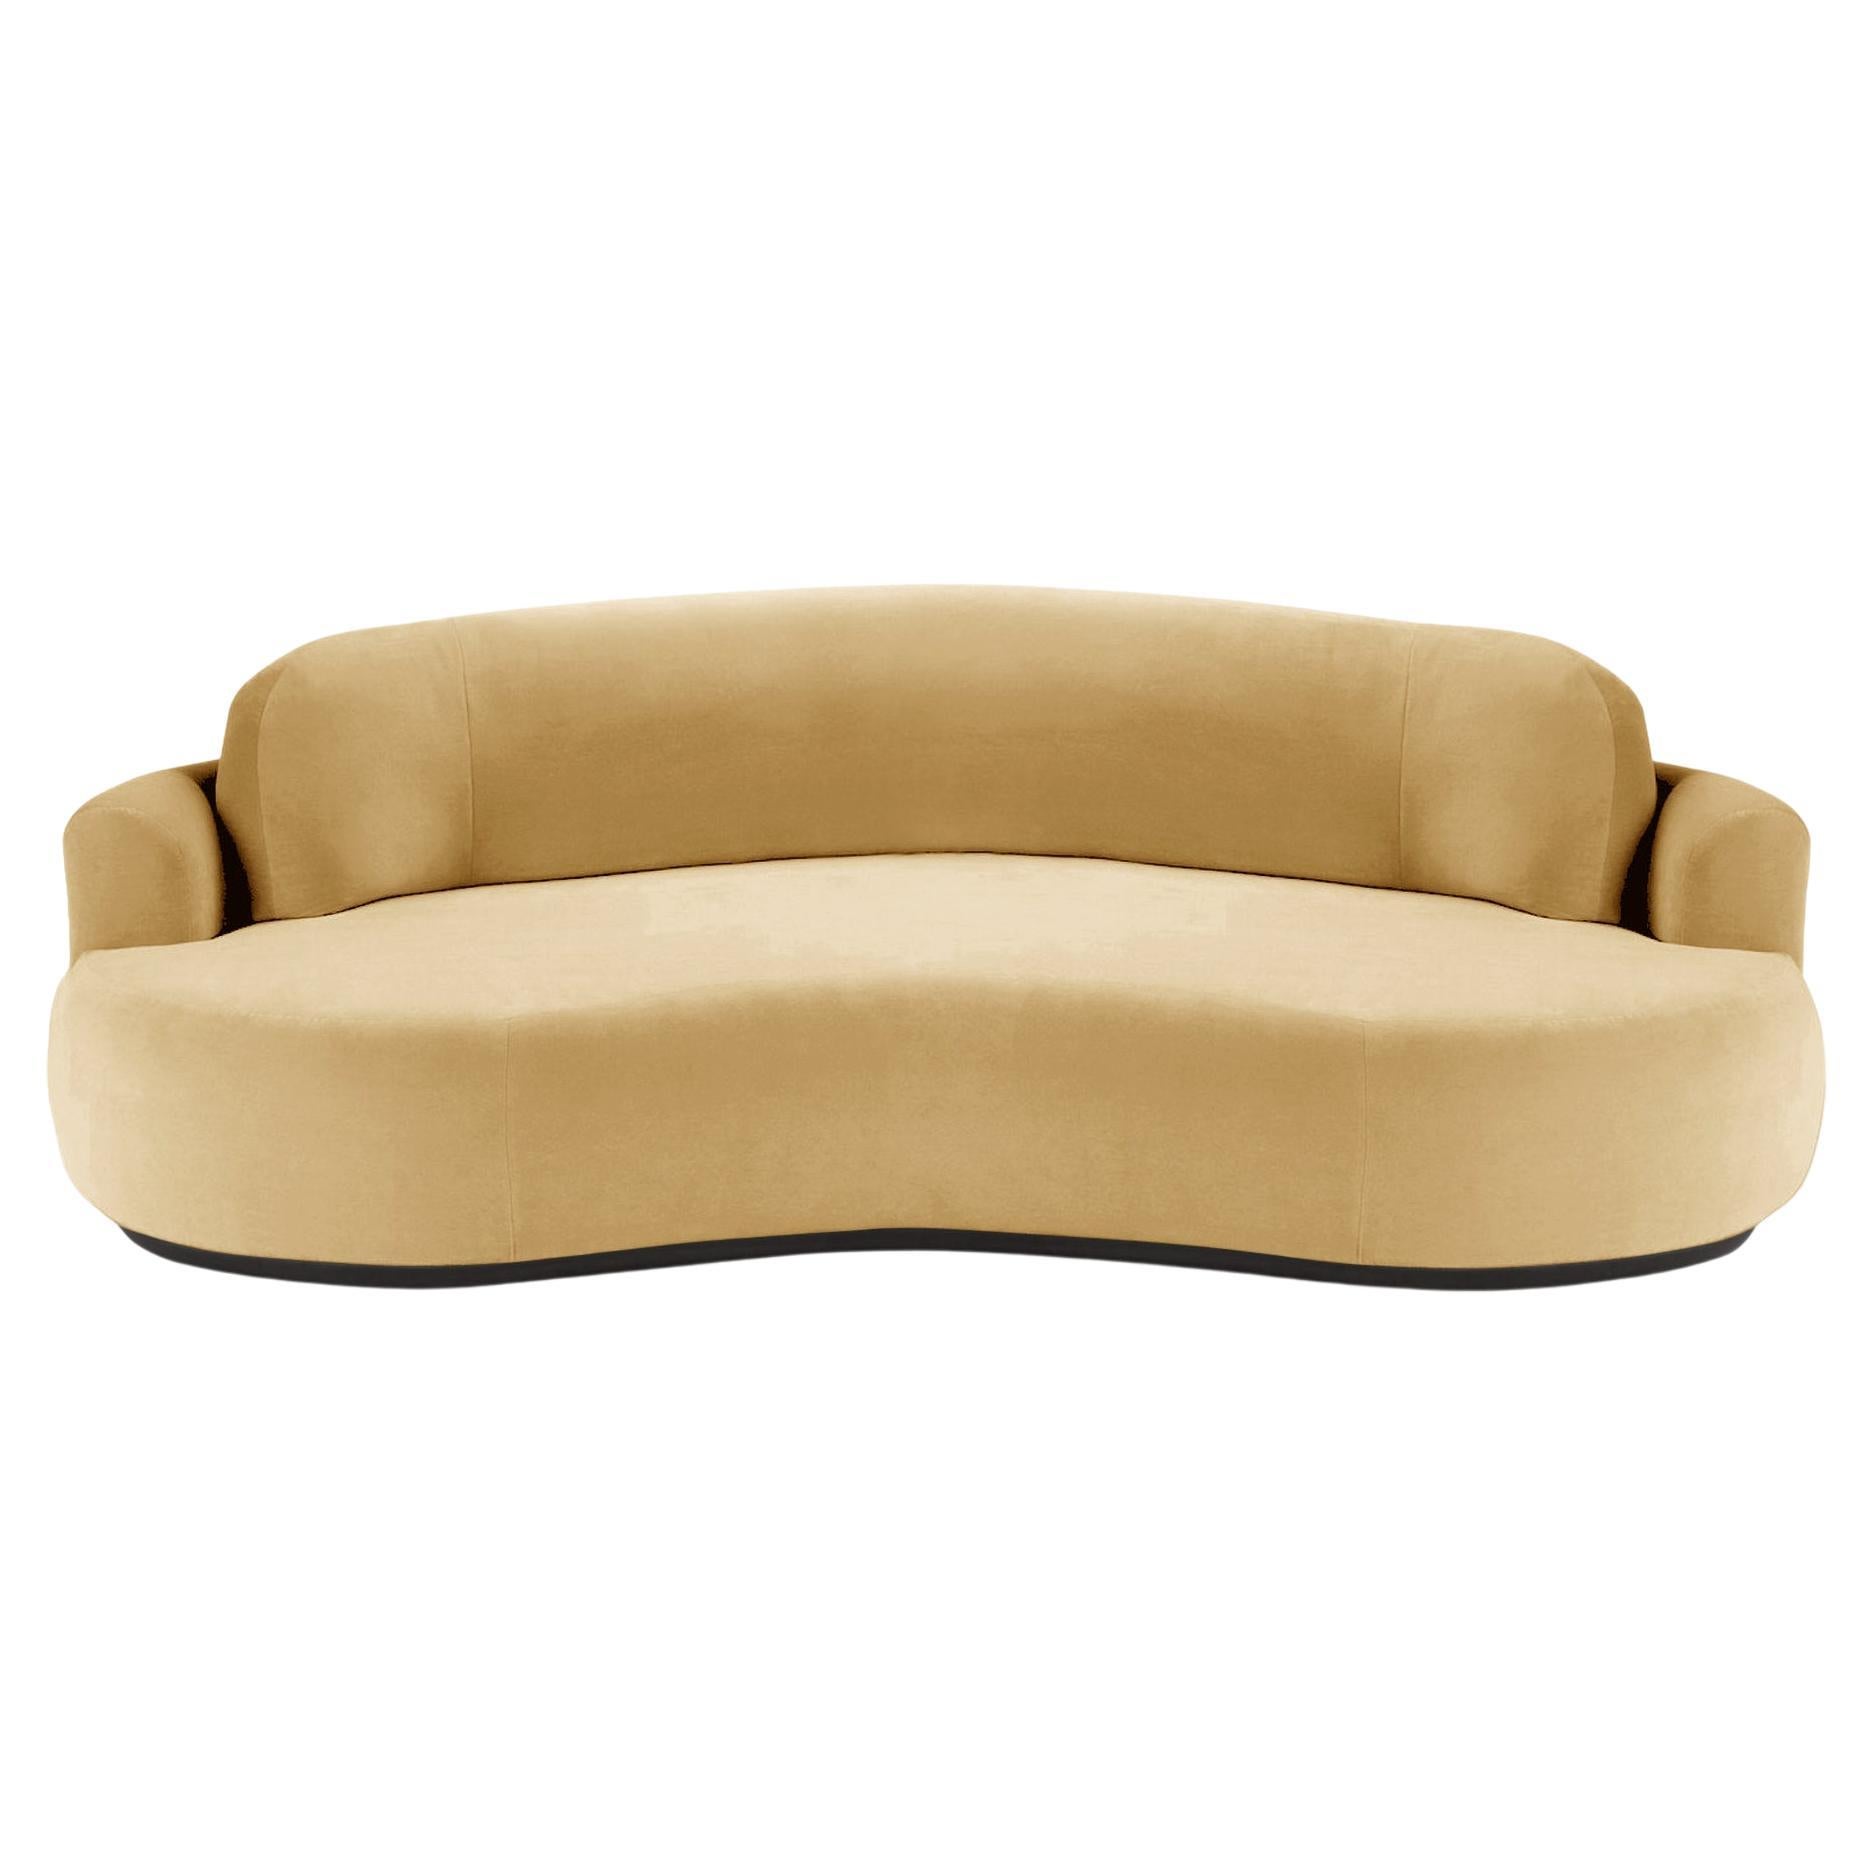 Naked Curved Sofa, Medium with Beech Ash-056-5 and Vigo Plantain For Sale